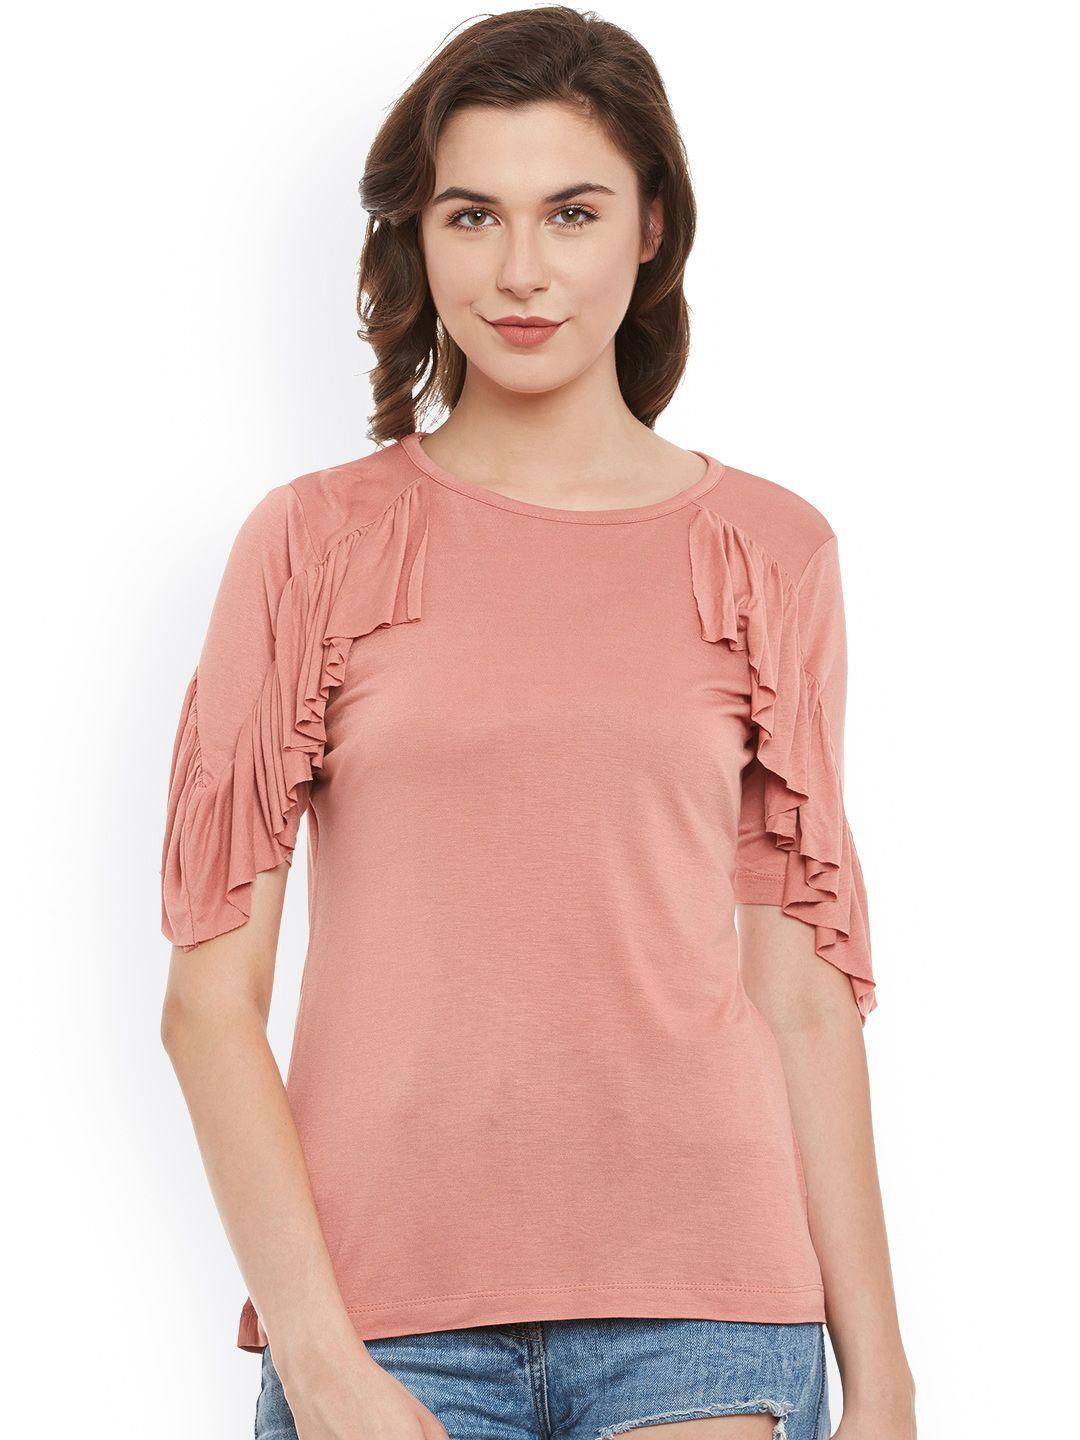 belle-fille-women-peach-coloured-solid-top-with-ruffled-detail